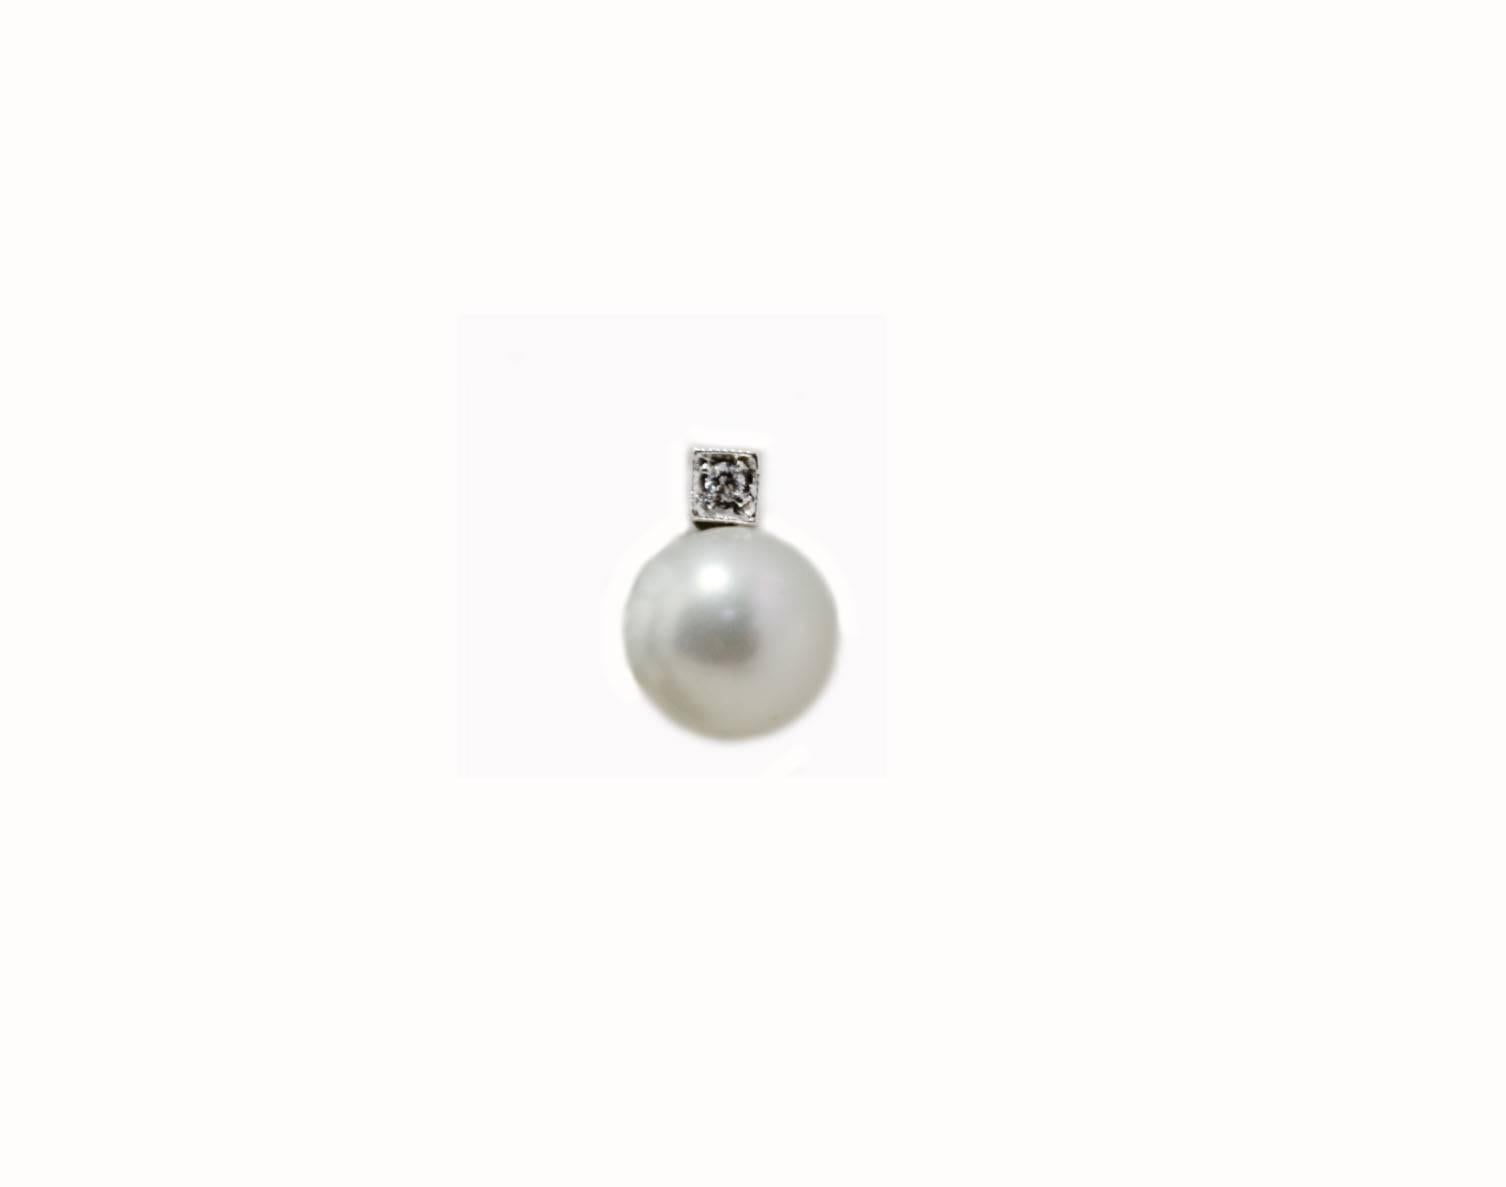 The simplicity in a classic stud earrings composed of a single shiny diamond on top of a little pearl mounted in 18 Kt white gold.
Tot weight 4 g both earrings, single one 2 g
Diamonds 0.02
Pearls 1.12 g, diameter 0.6/0.7 mm

Rf. hfh